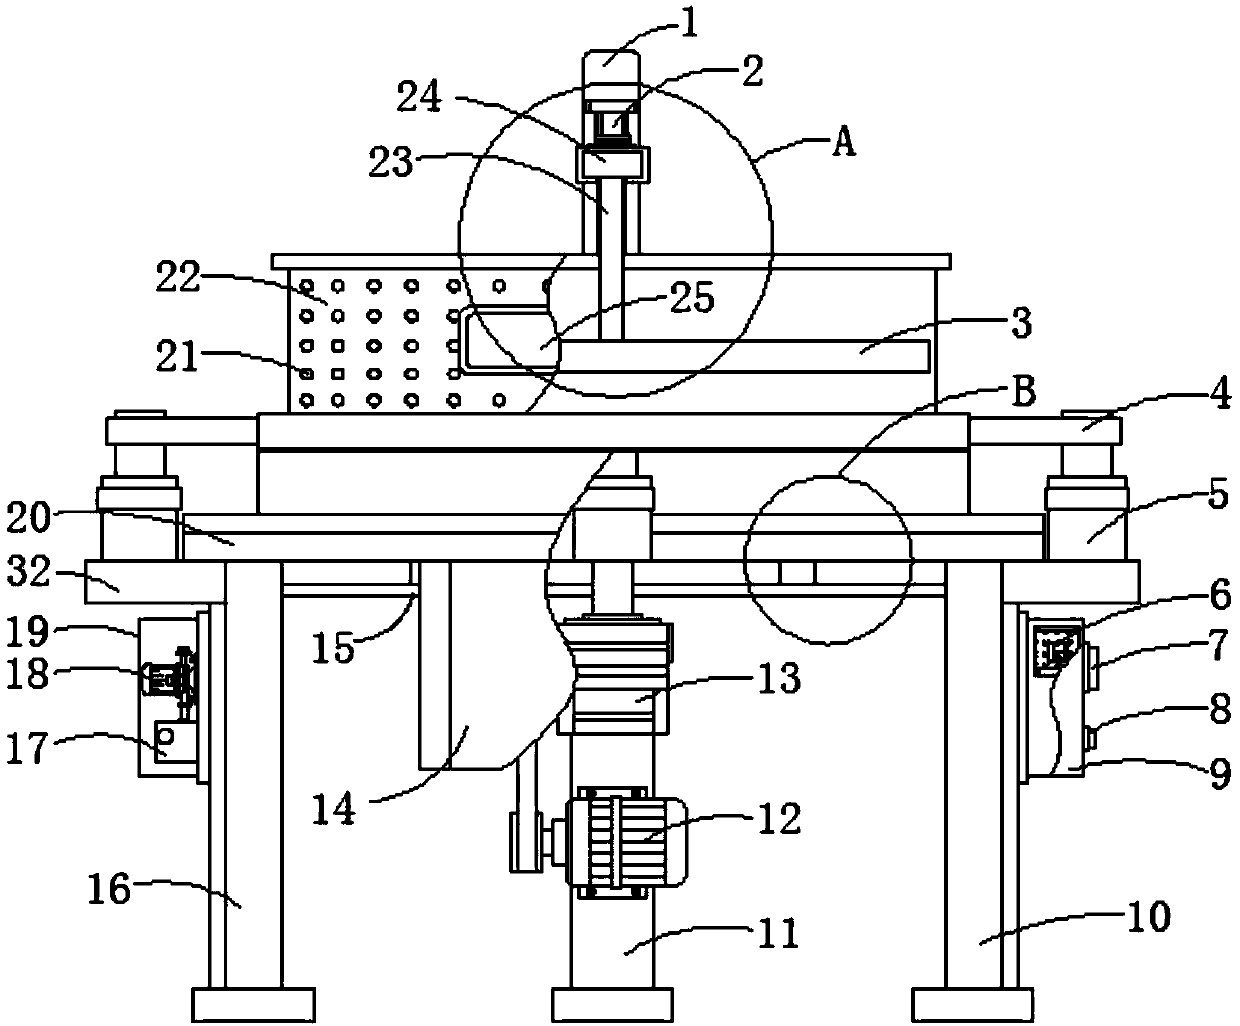 Tea leaf rolling machine capable of automatically controlling rolling pressure